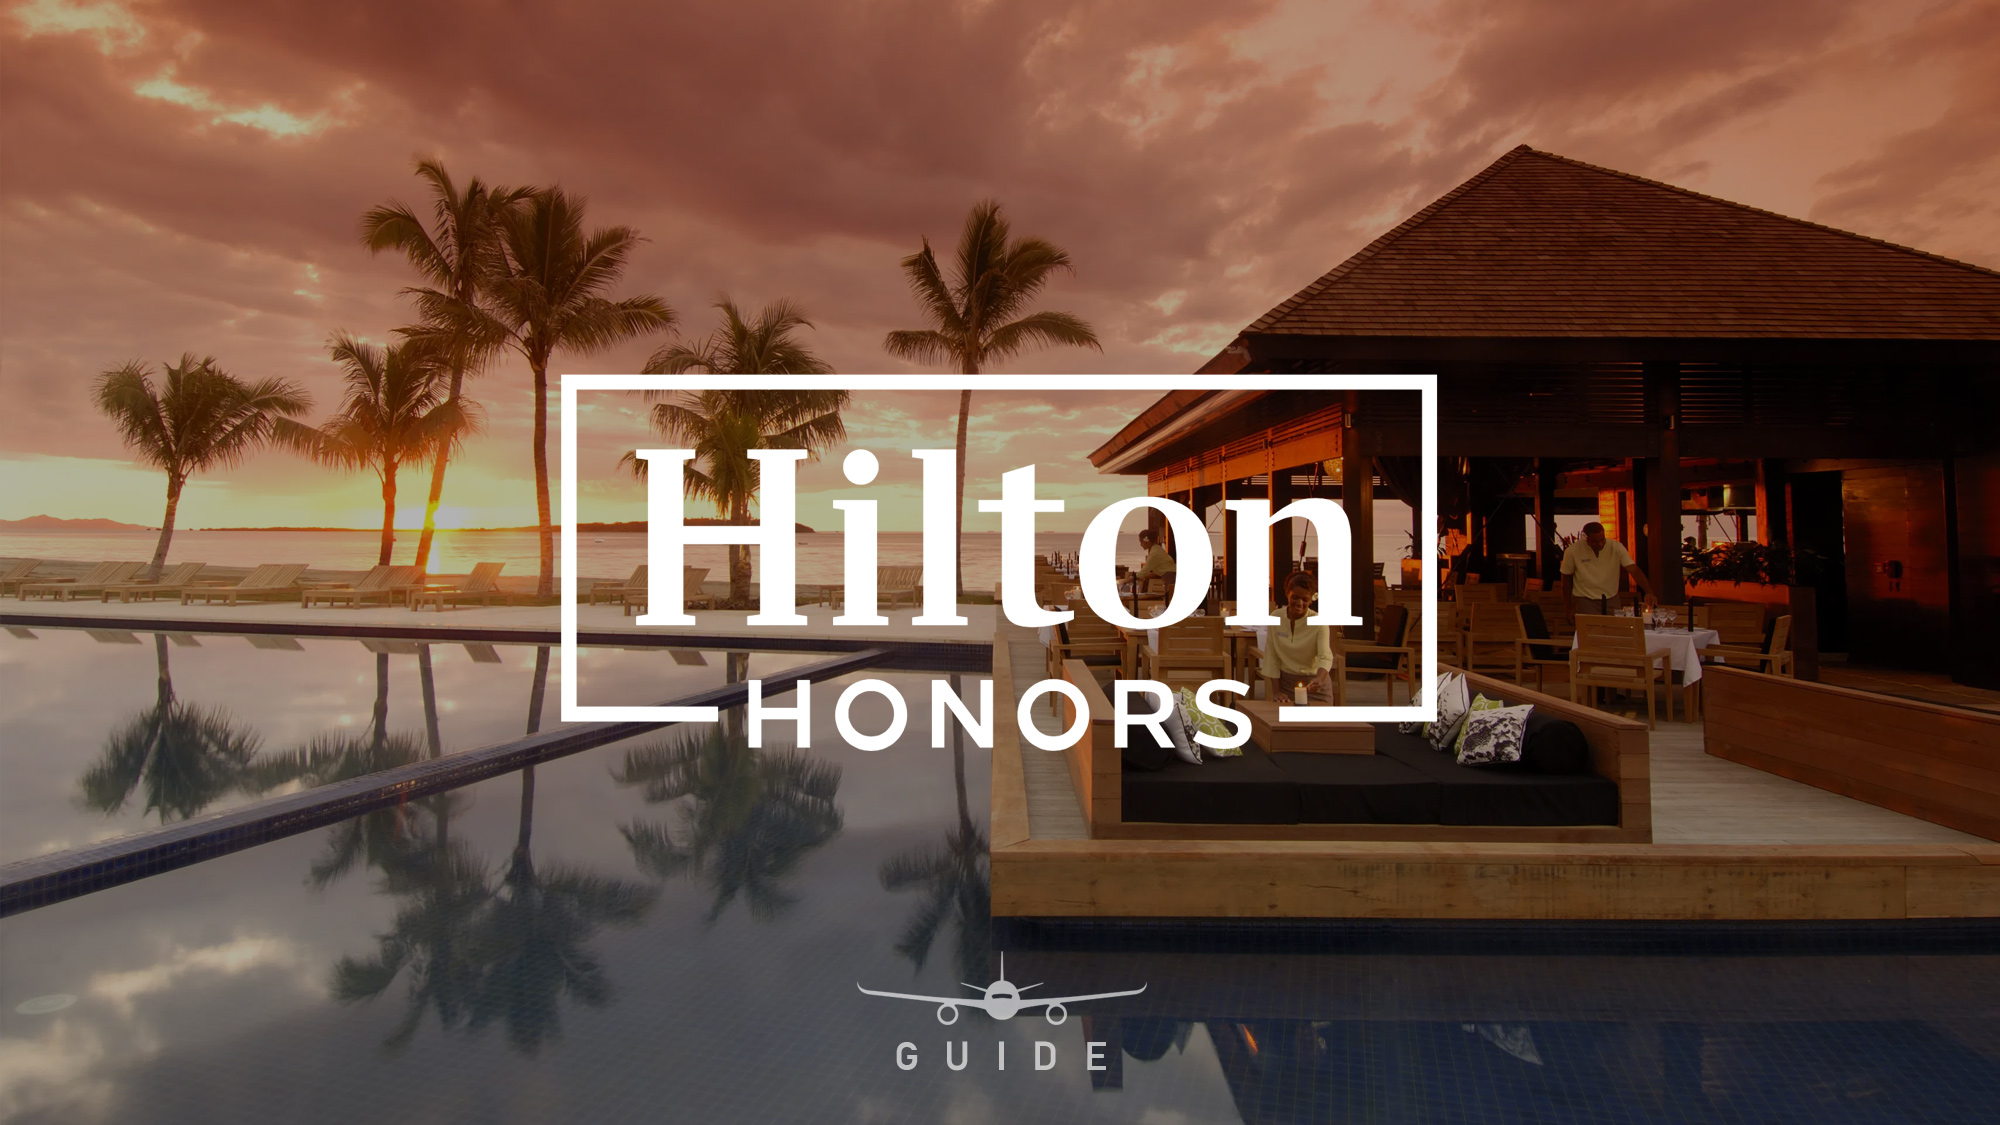 4. How to Redeem Your Hilton Honors Premium WiFi Code - wide 4